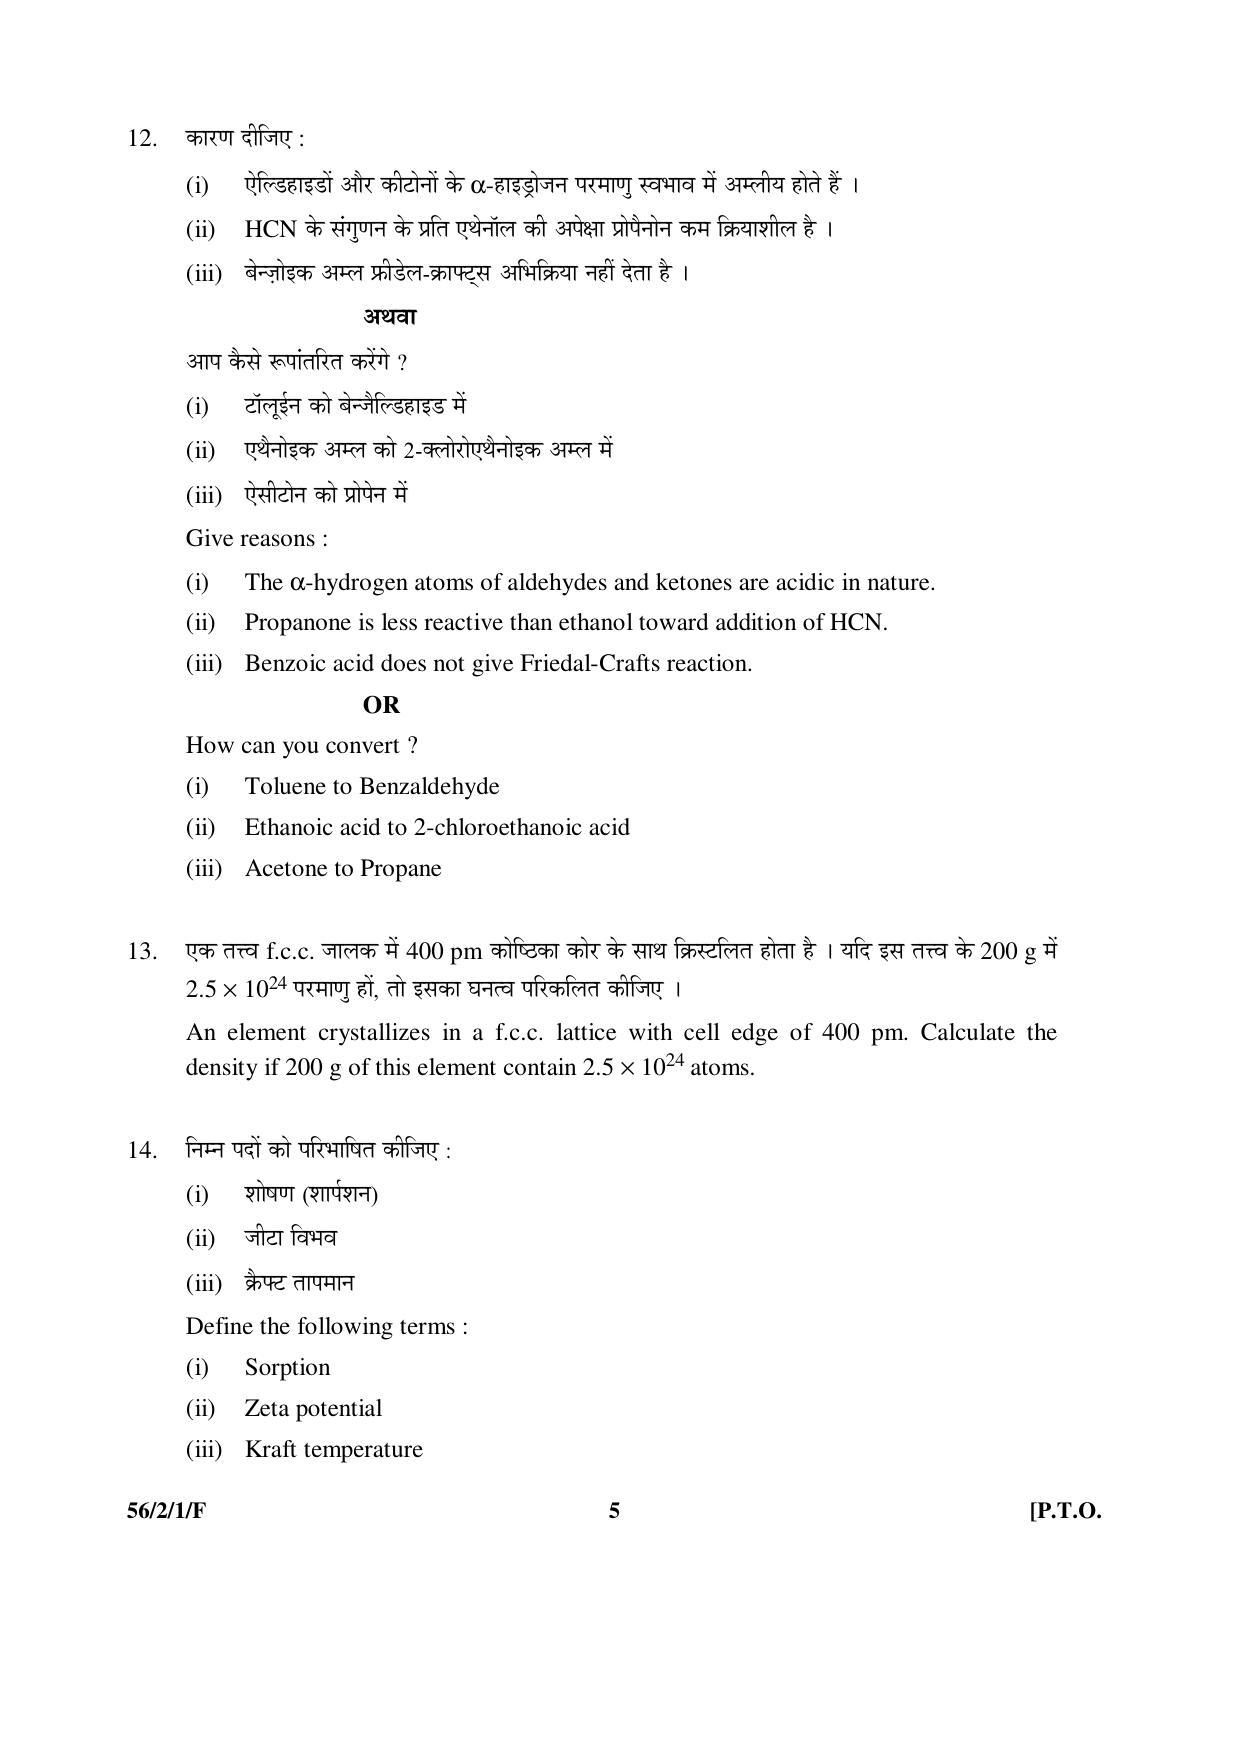 CBSE Class 12 56-2-1-F _Chemistry_ 2016 Question Paper - Page 5